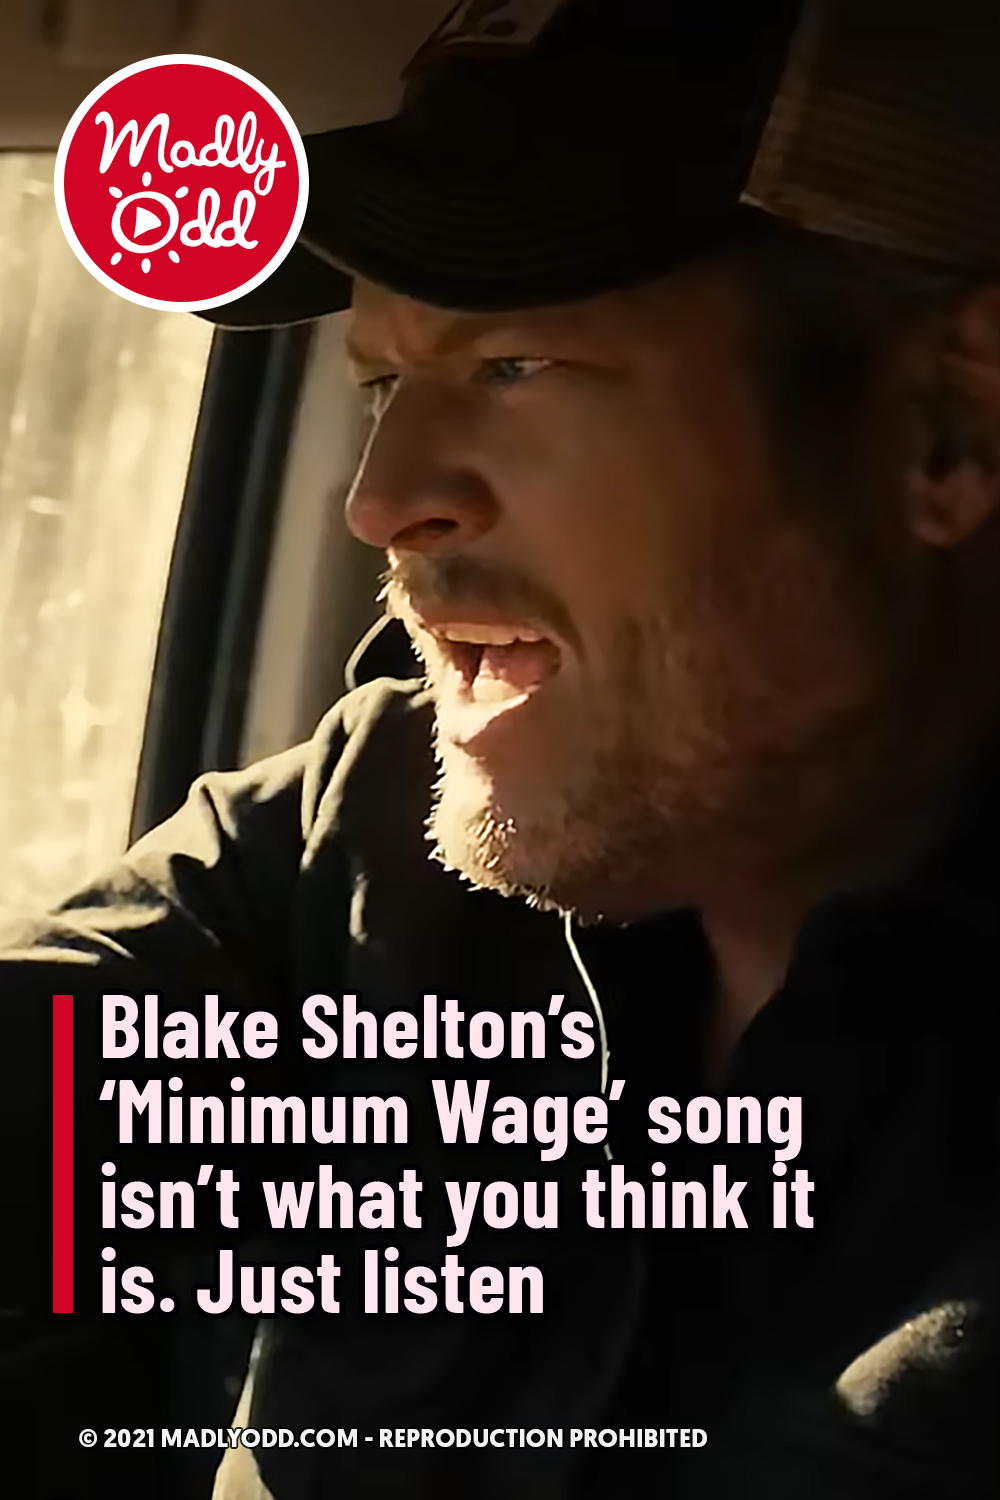 Blake Shelton’s ‘Minimum Wage’ song isn’t what you think it is. Just listen